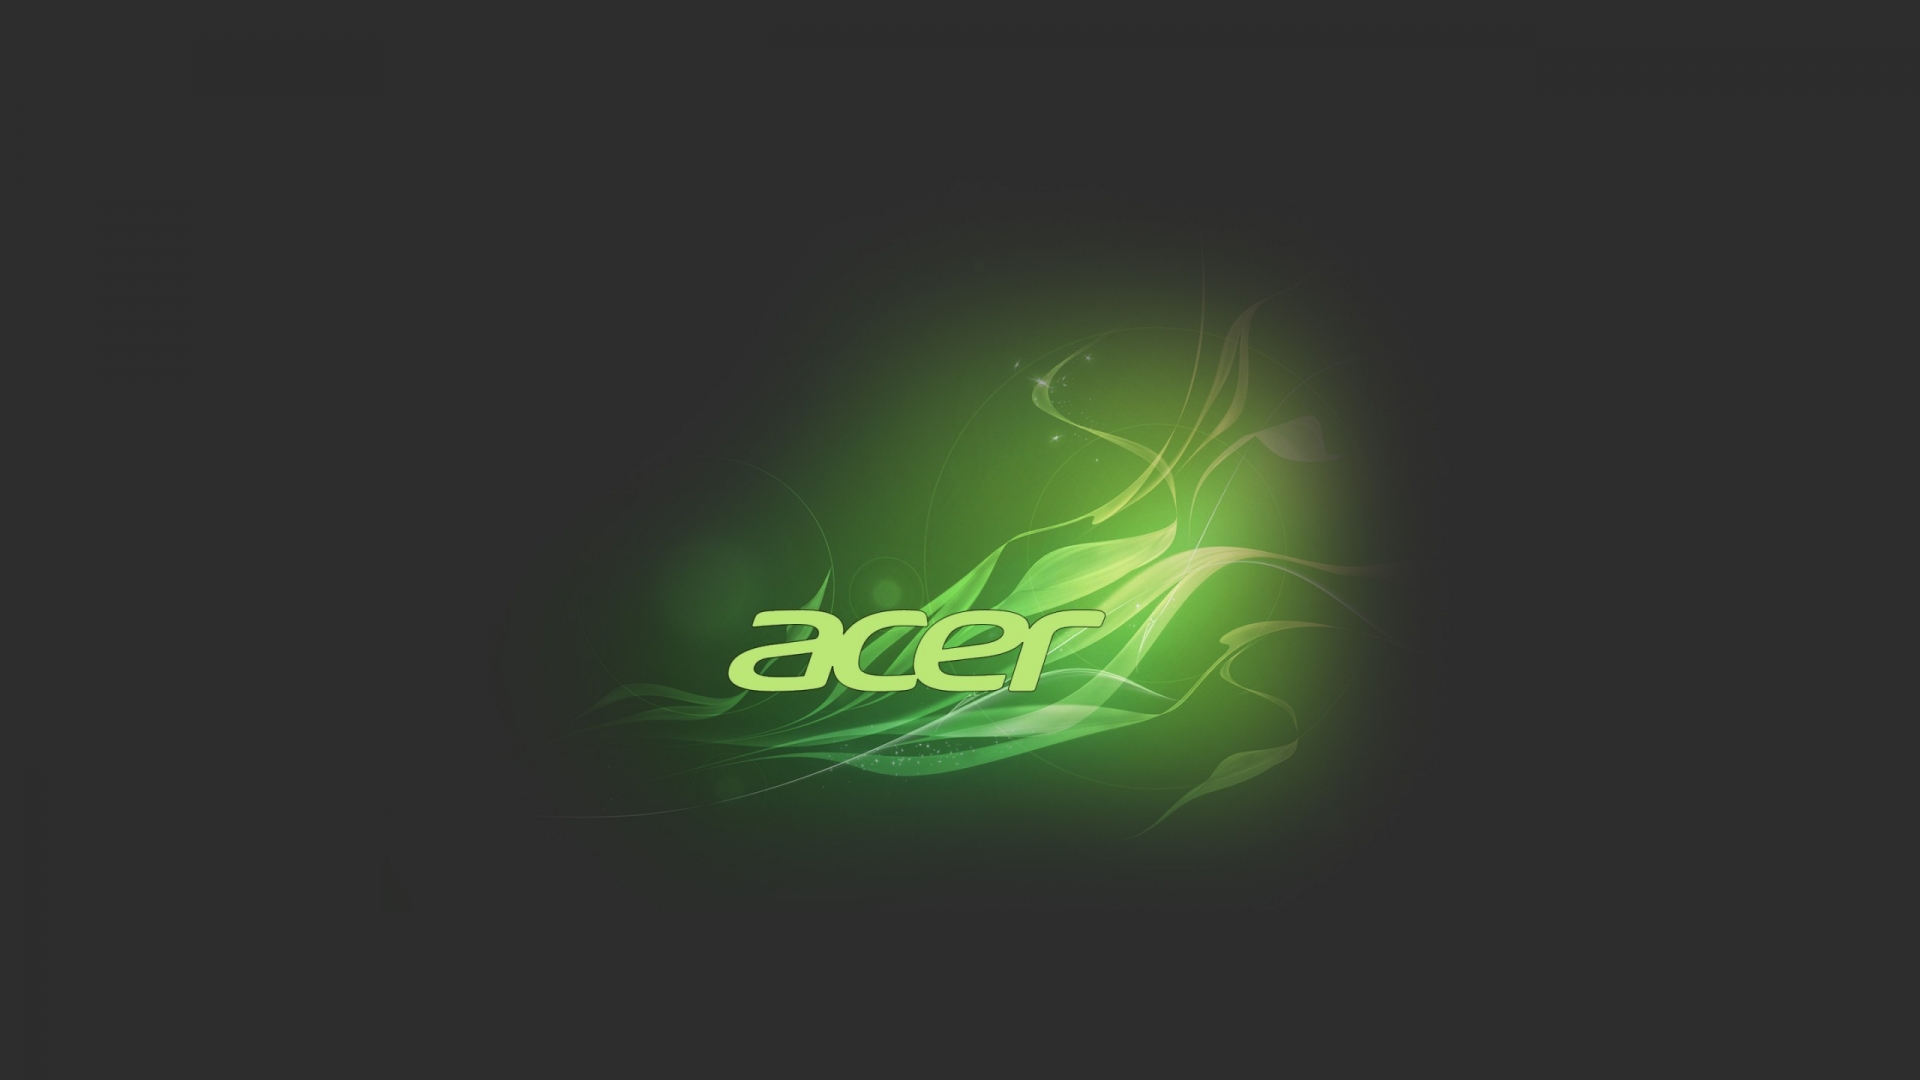 Acer Floral for 1920 x 1080 HDTV 1080p resolution